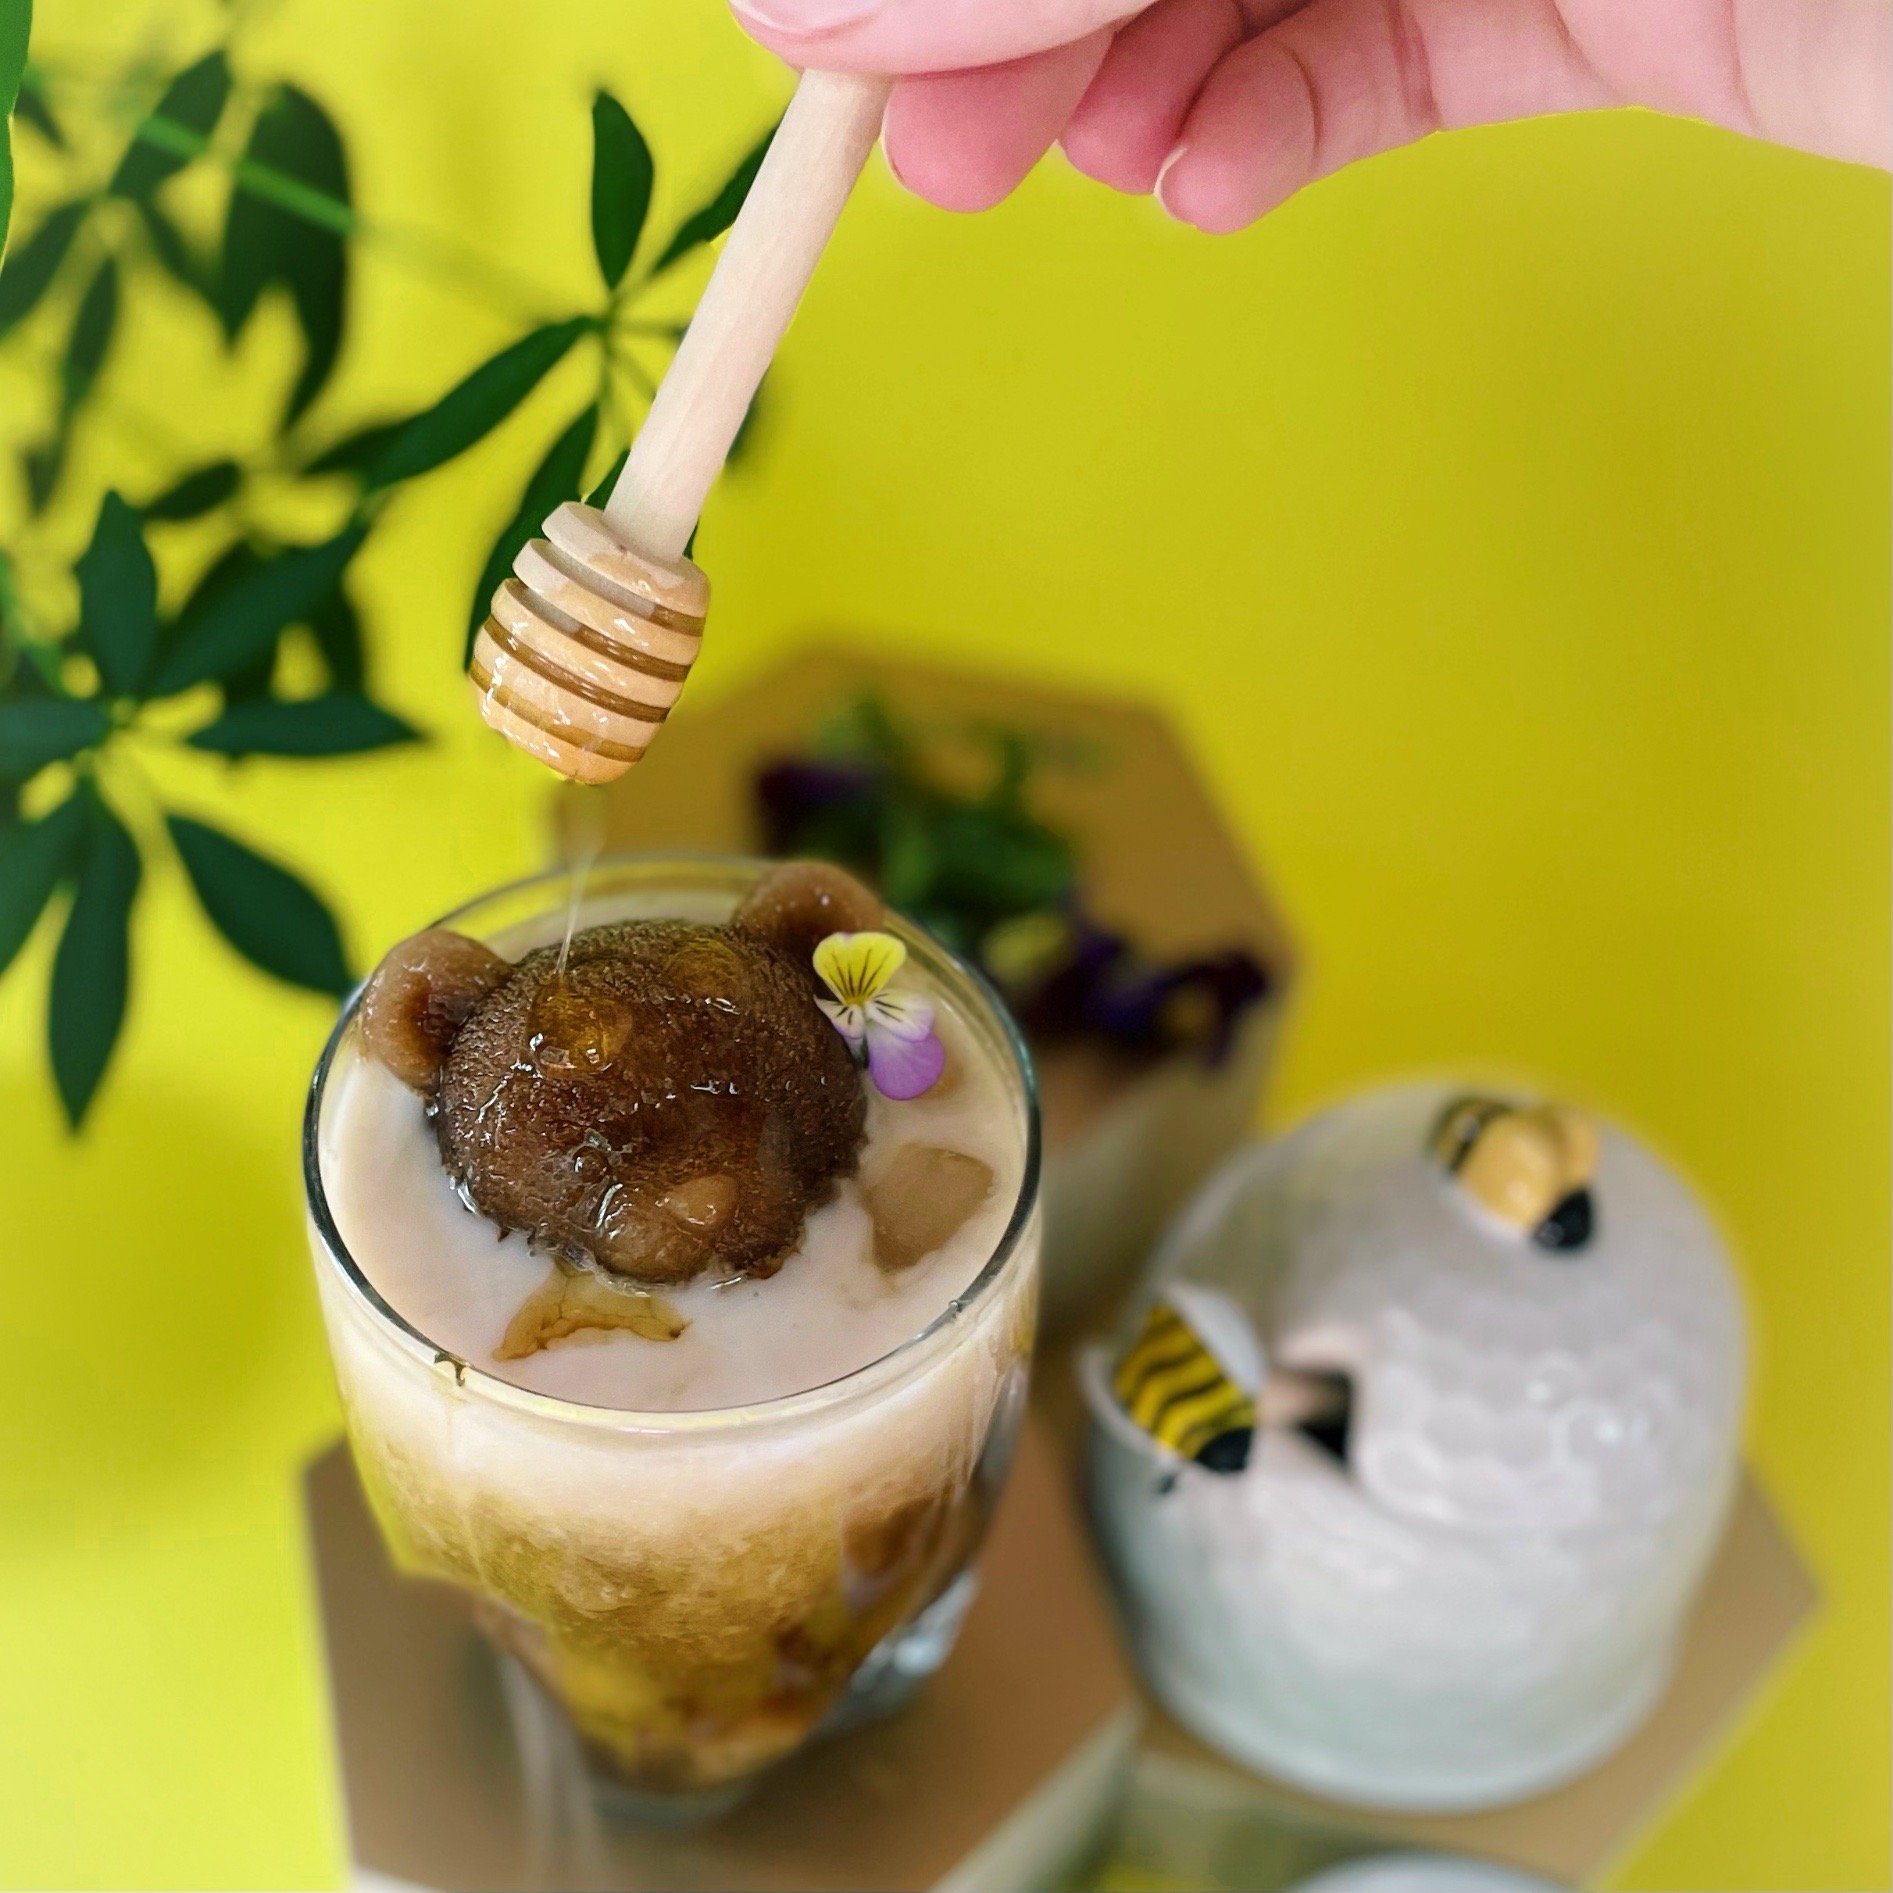 https://images.squarespace-cdn.com/content/v1/60254ad96f8eff02083840c4/ba793d4c-7dd7-4ee2-bc75-df3ee29f0094/homemade+honey+bee+latte+coffee+recipe+made+with+honey+and+brown+sugar+topped+with+an+ice+teddy+bear.JPG